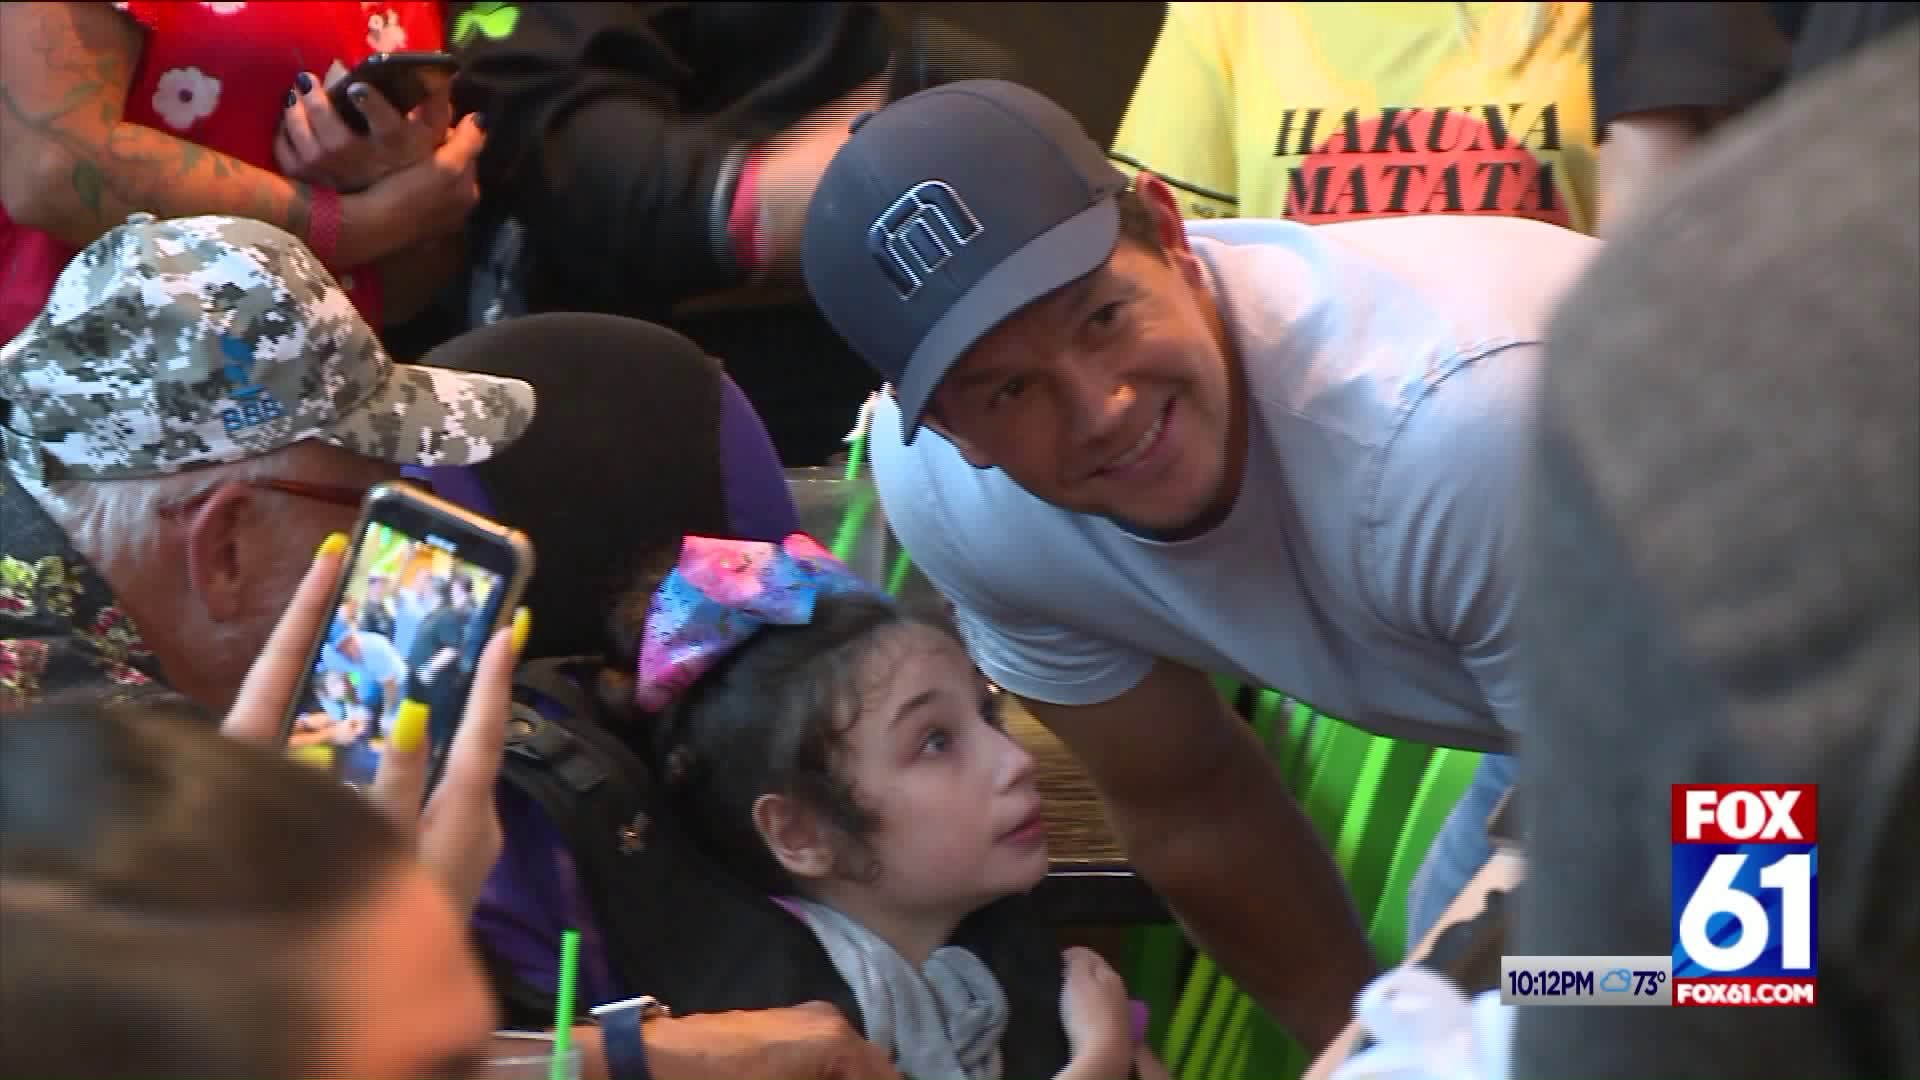 Mark Wahlberg makes appearance at Trumbull mall